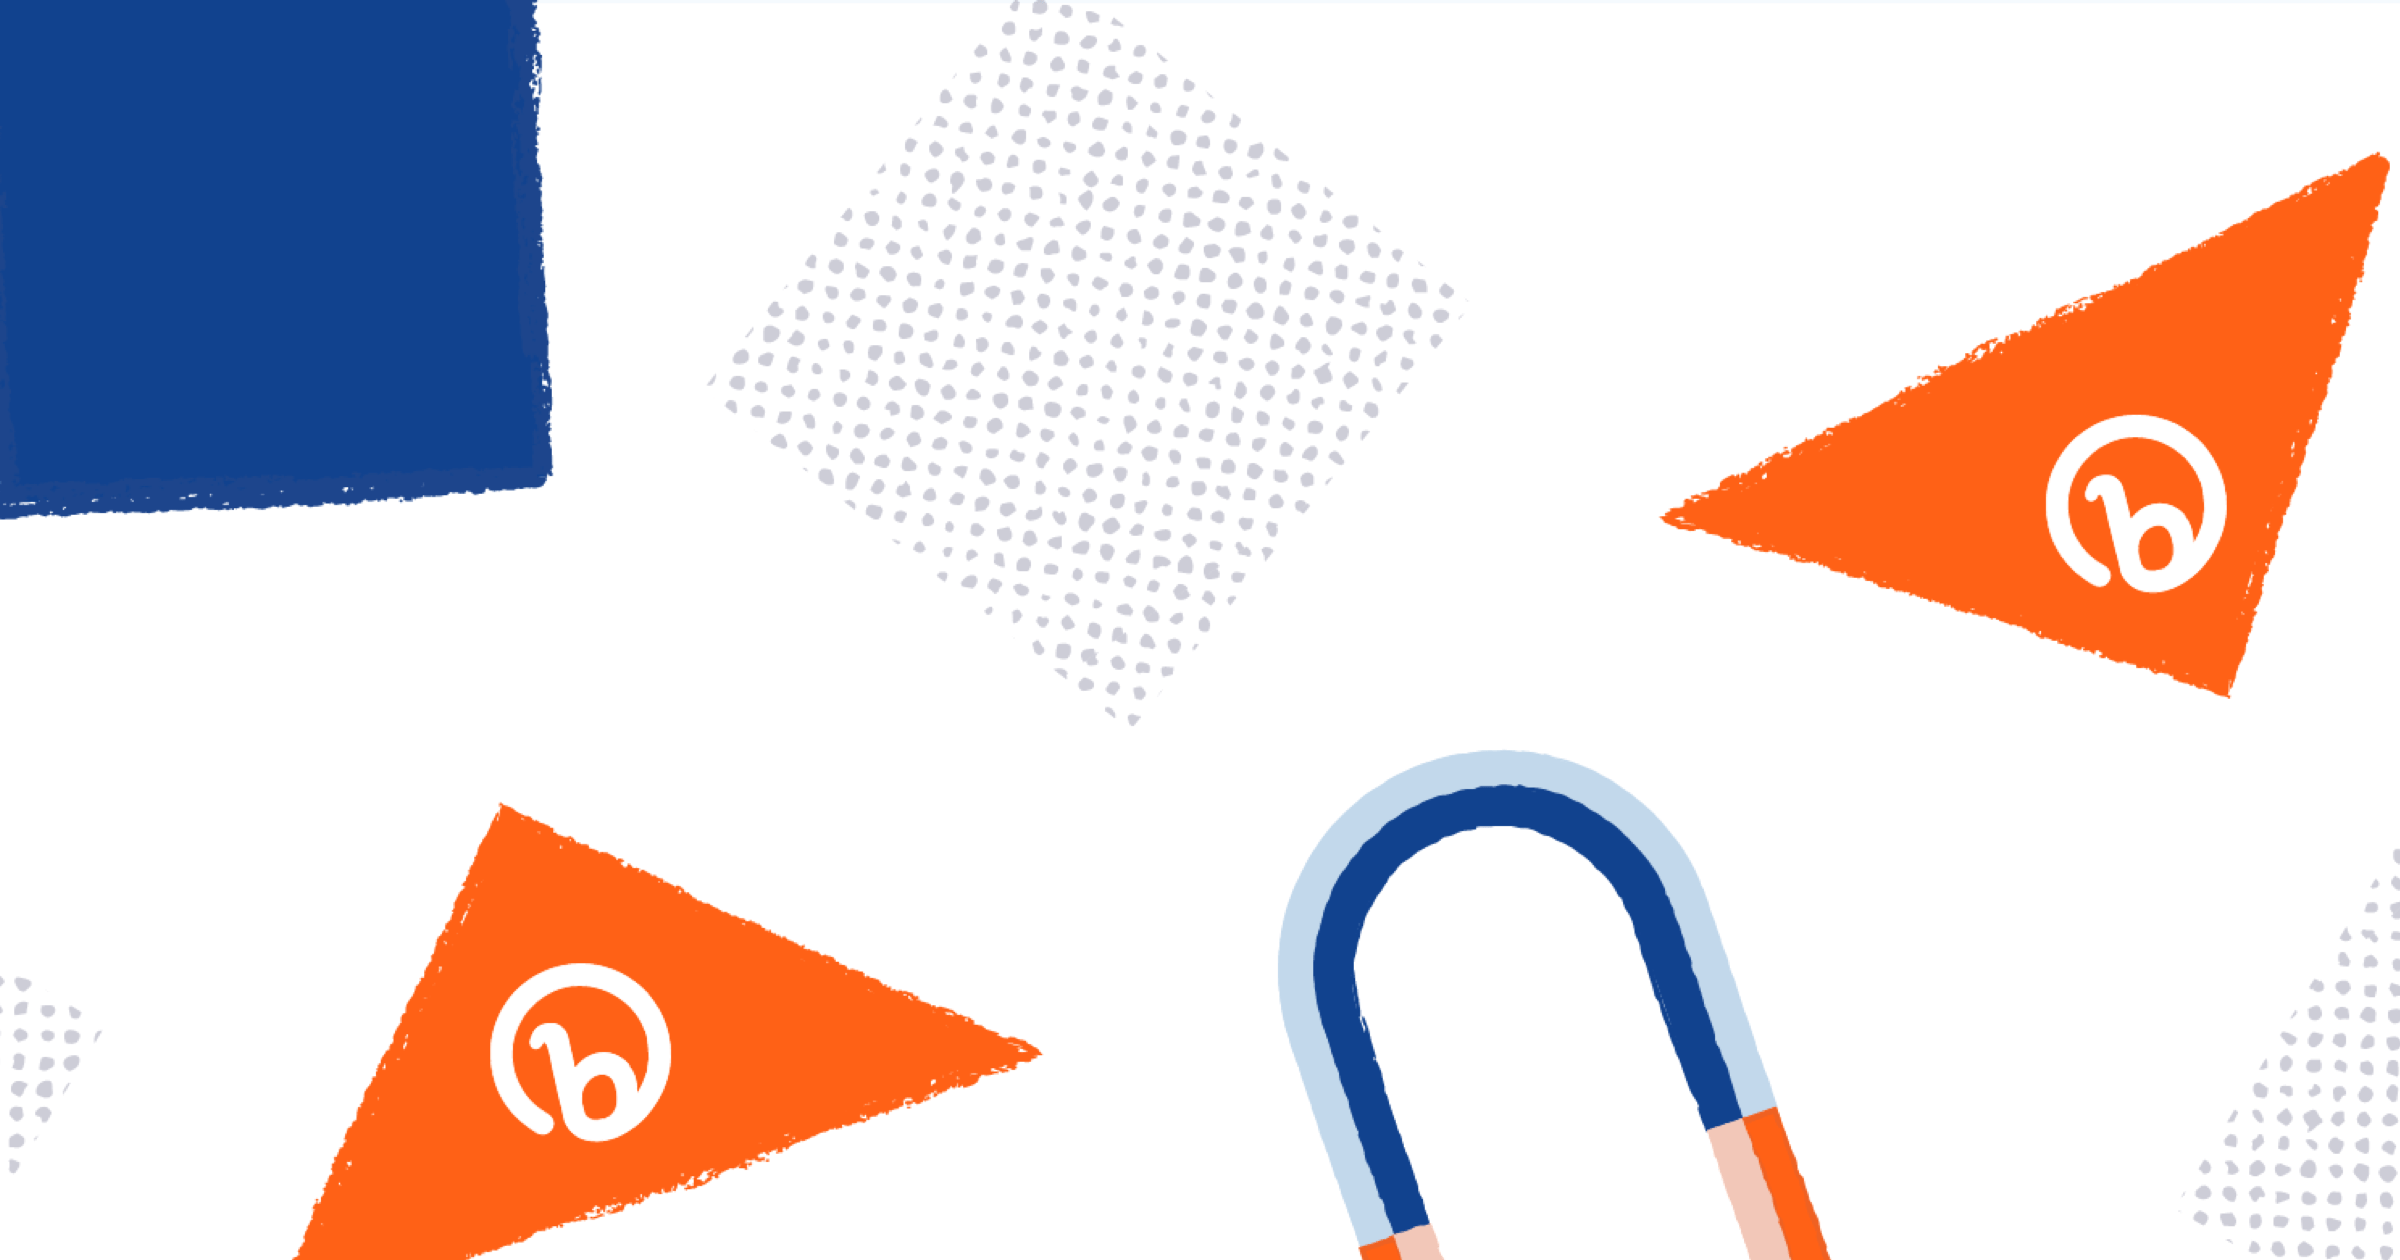 triangles, squares, and a cartoon magnet with the bitly logo